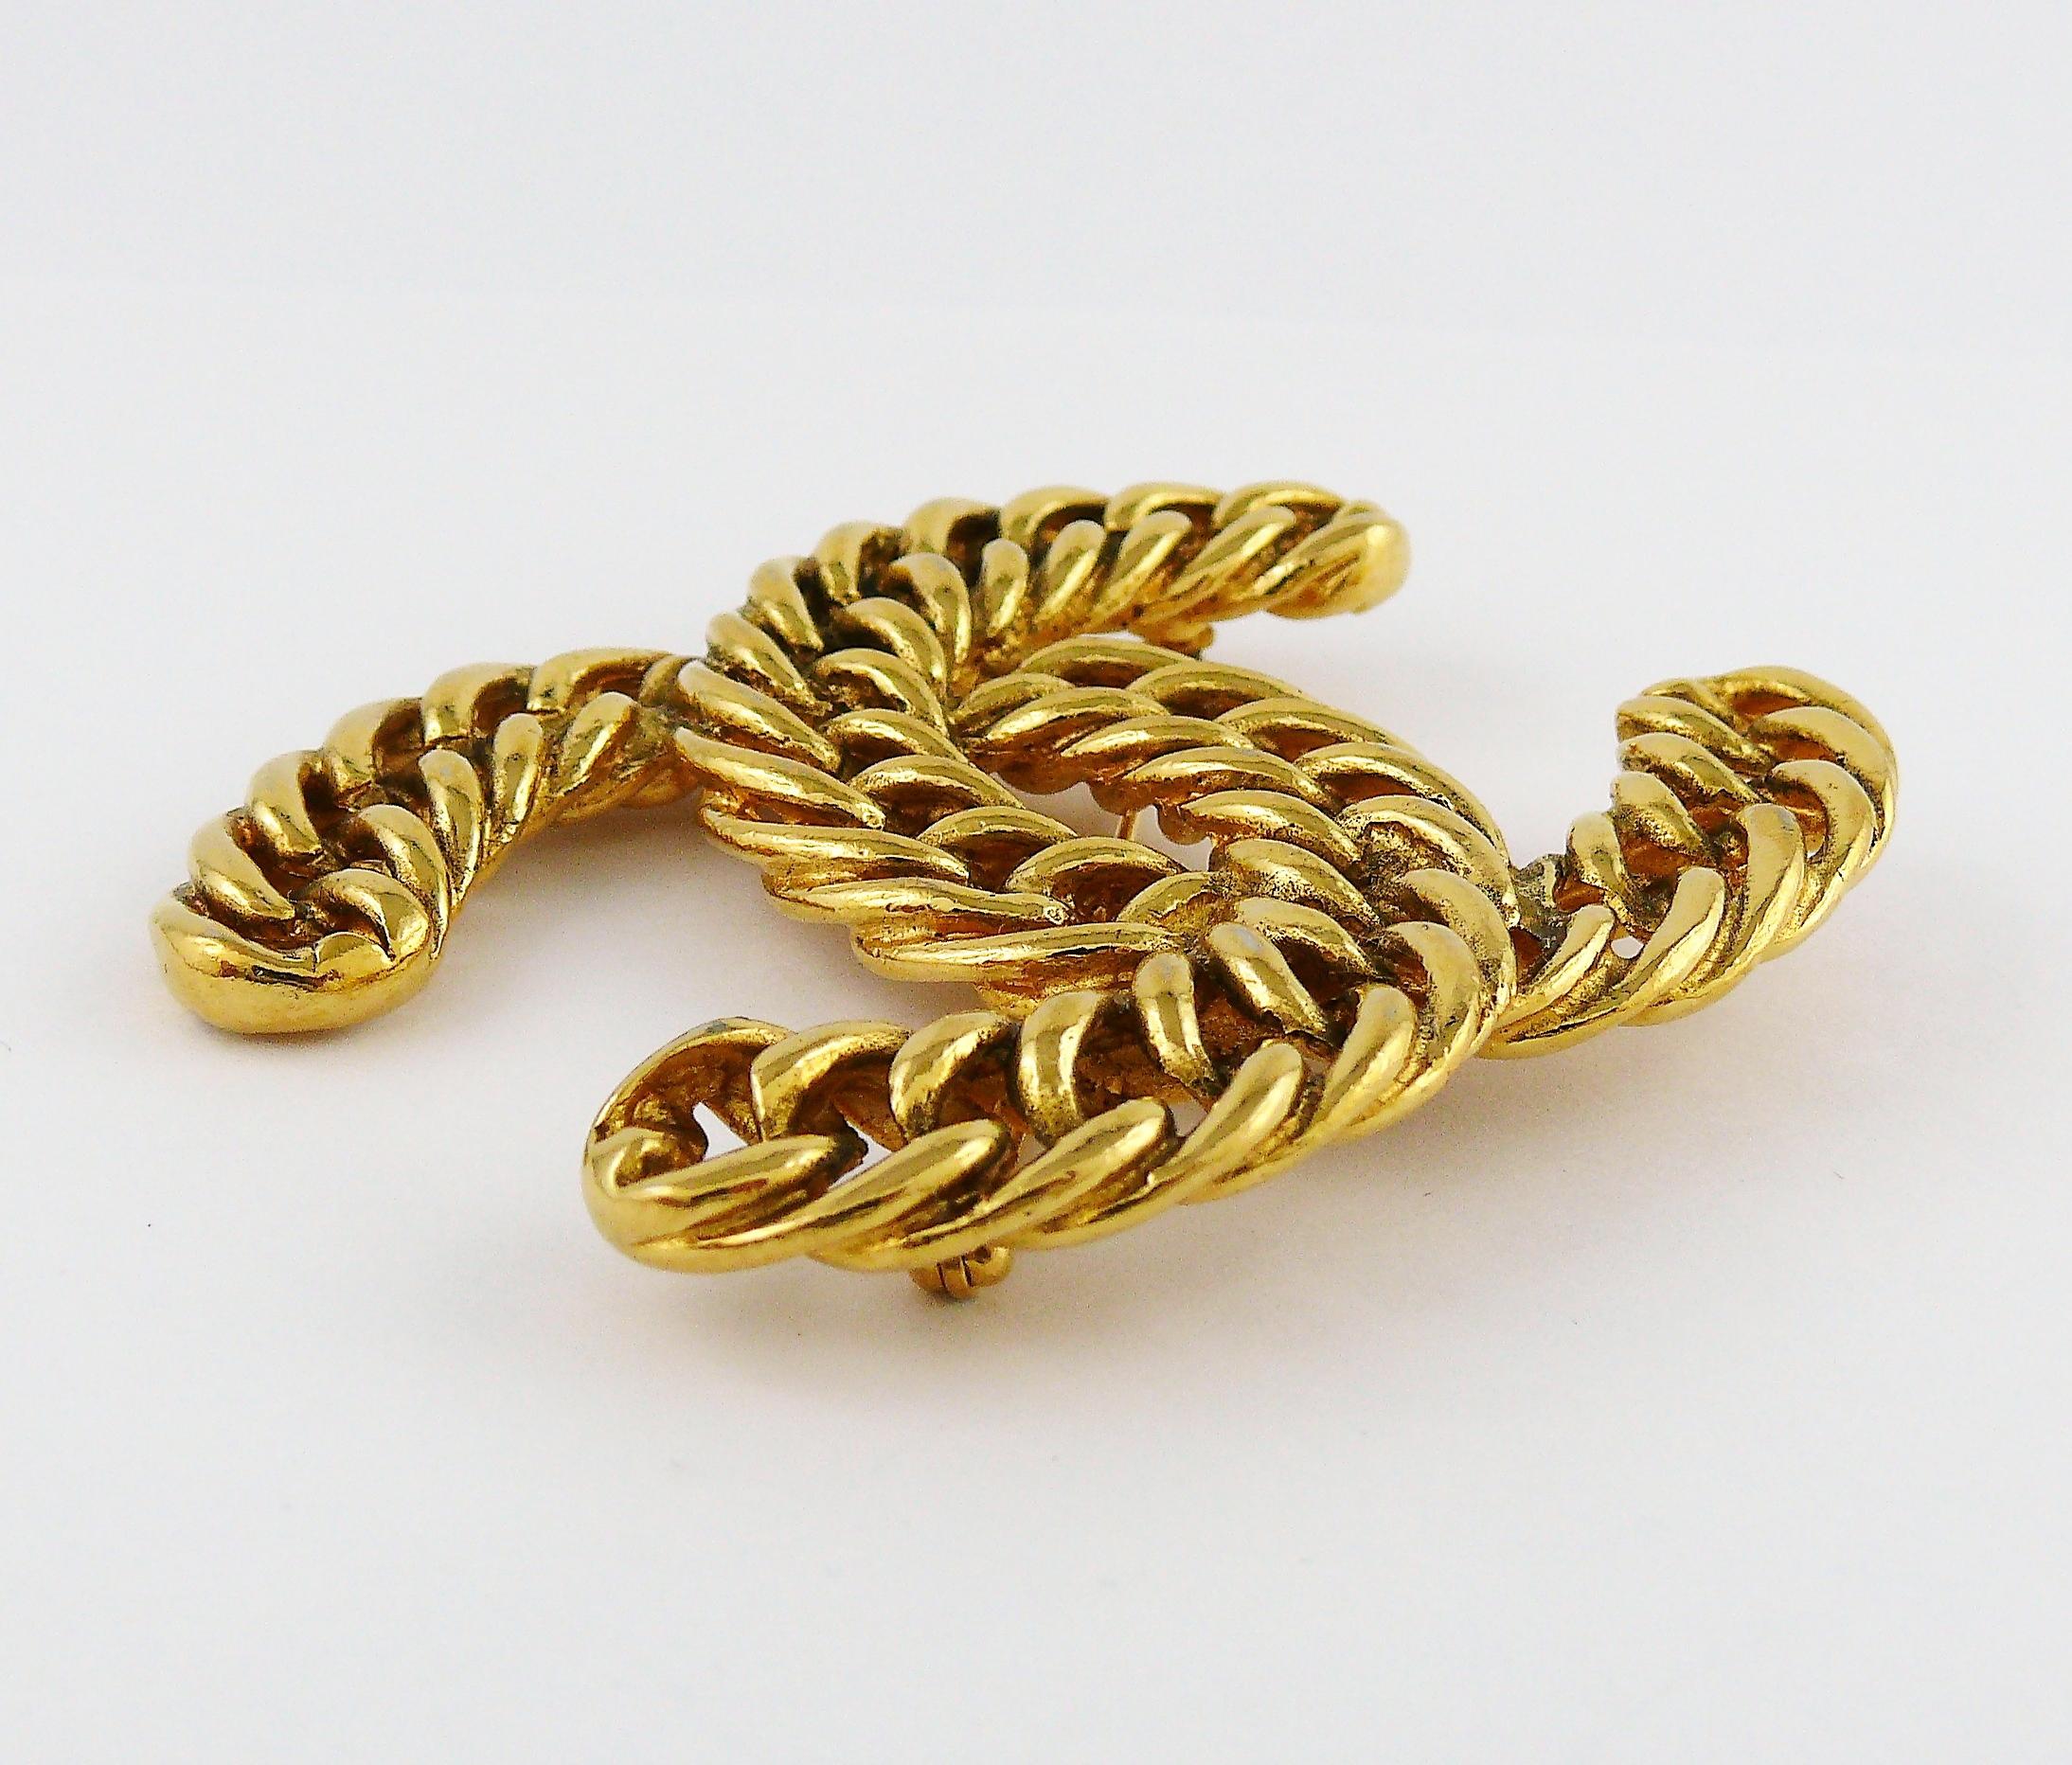 CHANEL vintage massive iconic gold toned rigid curb chain brooch featuring intertwined CC monogram.

Circa 1980.

Embossed 1107.
Unsigned (usual for this model).

Indicative measurements : height approx. 5.2 cm (2.05 inches) / width approx. 6.6 cm